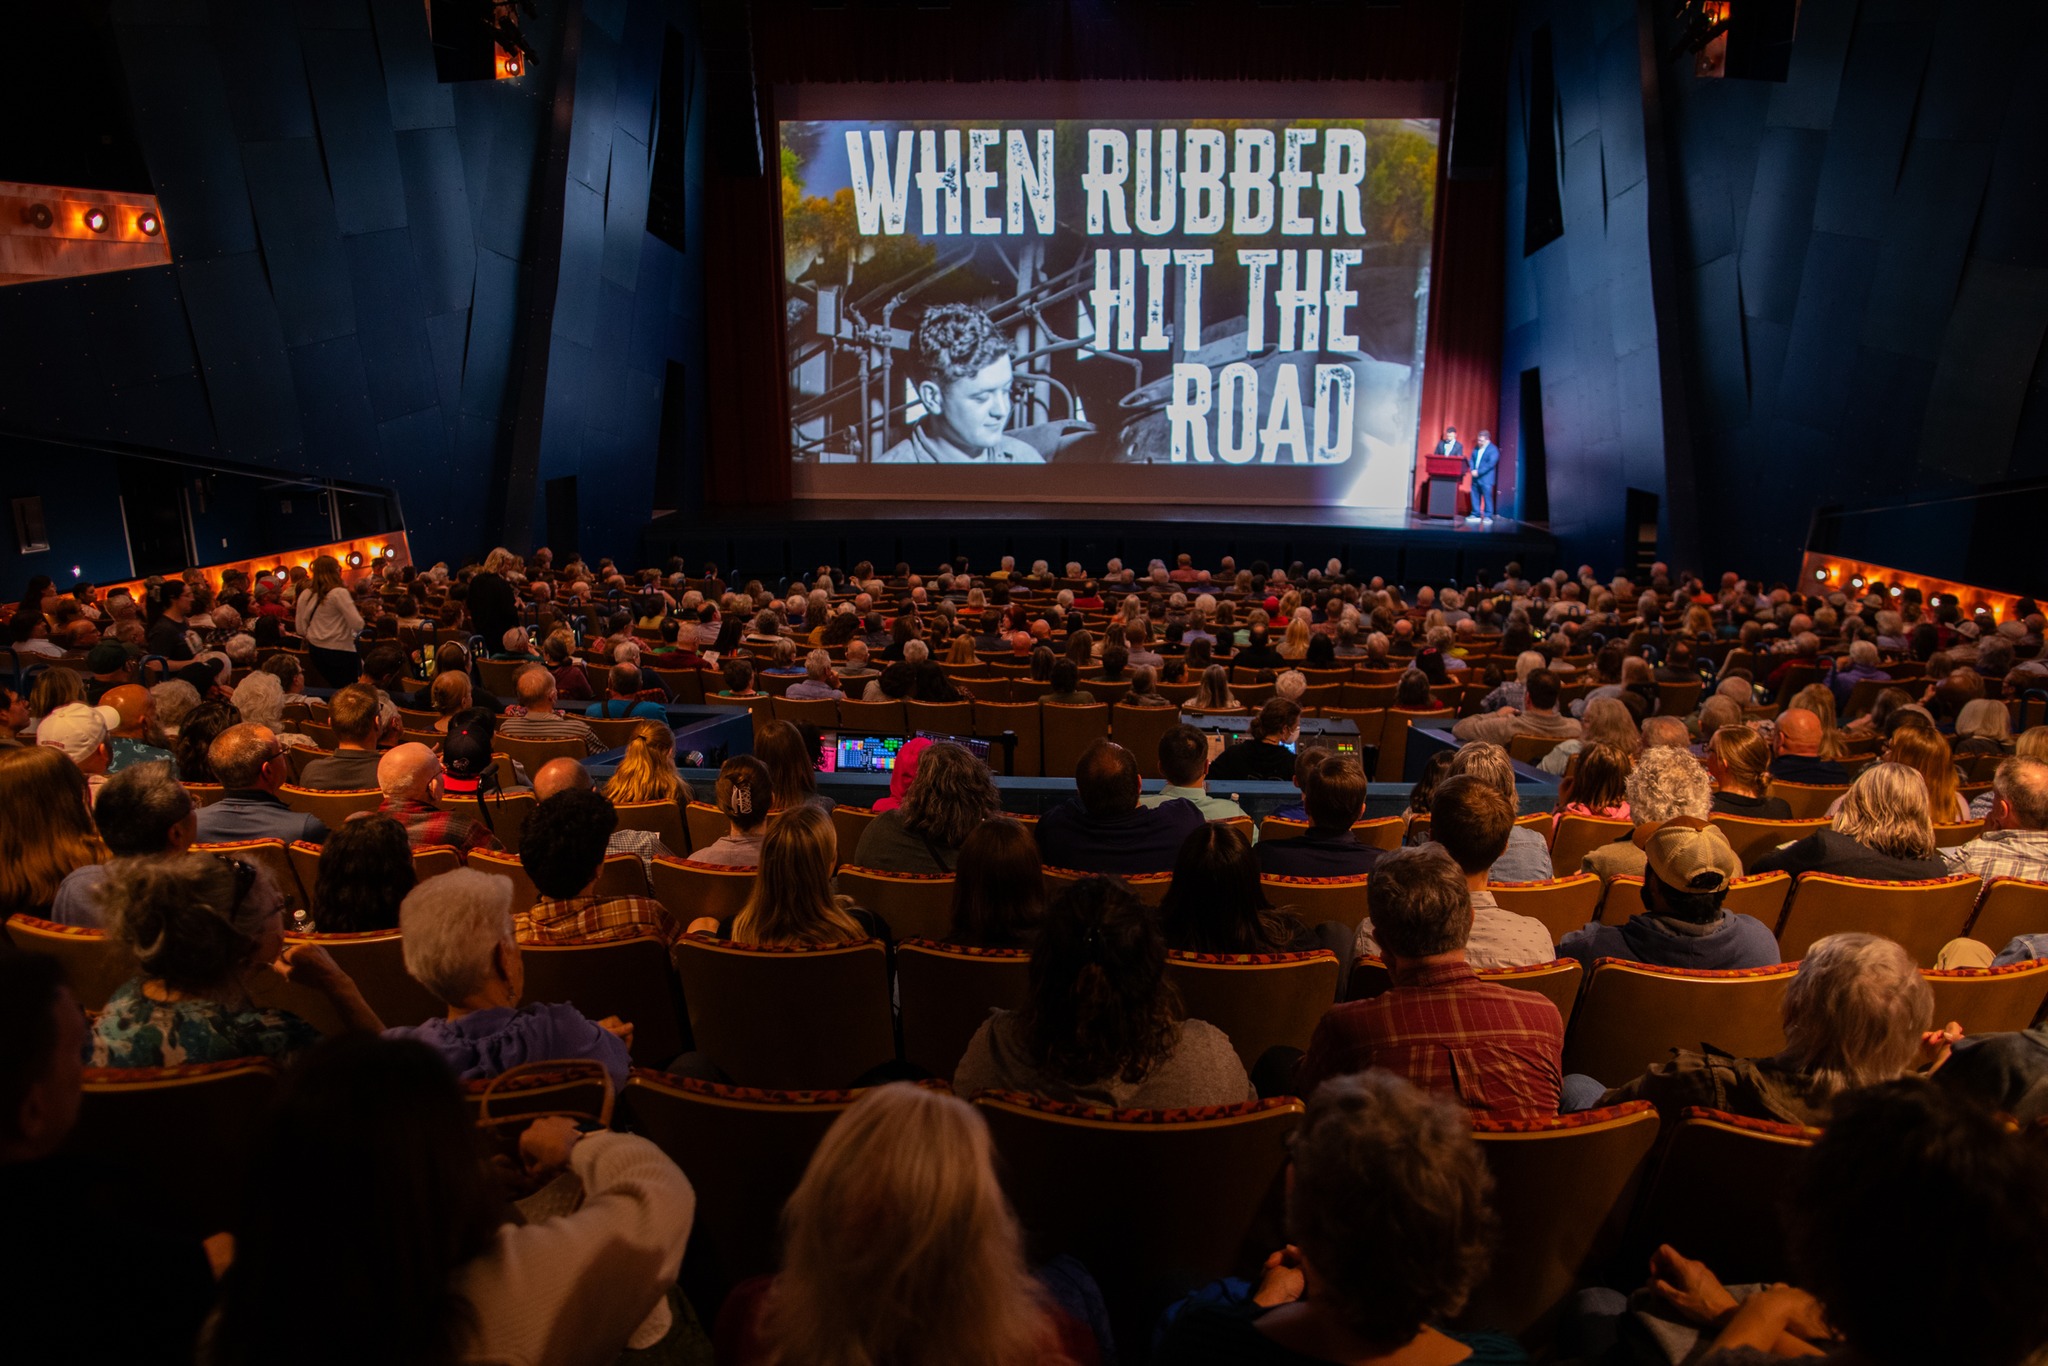 Filmmakers Steve Dayton and B.J. Hollars address the audience at a screening of their documentary, "When Rubber Hits the Road." Photo courtesy of Justin Patchin